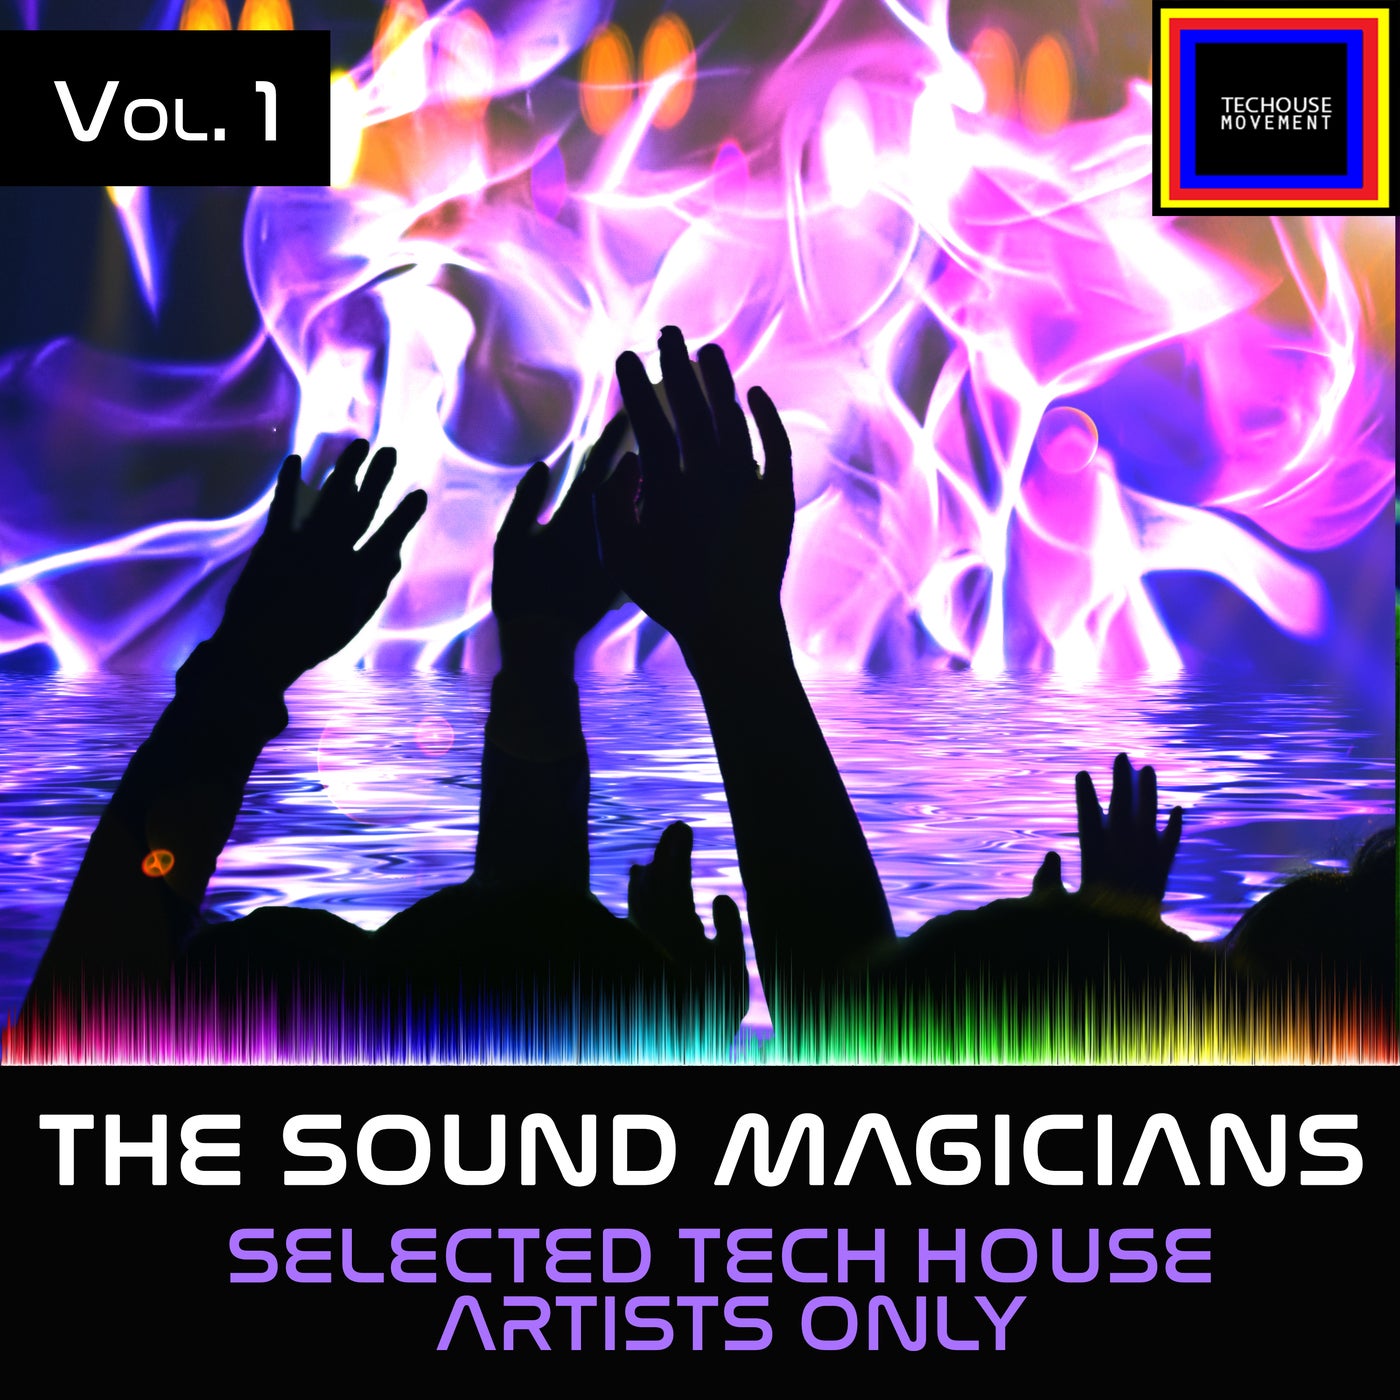 The Sound Magicians, Vol. 1 - Selected Tech House Artists Only